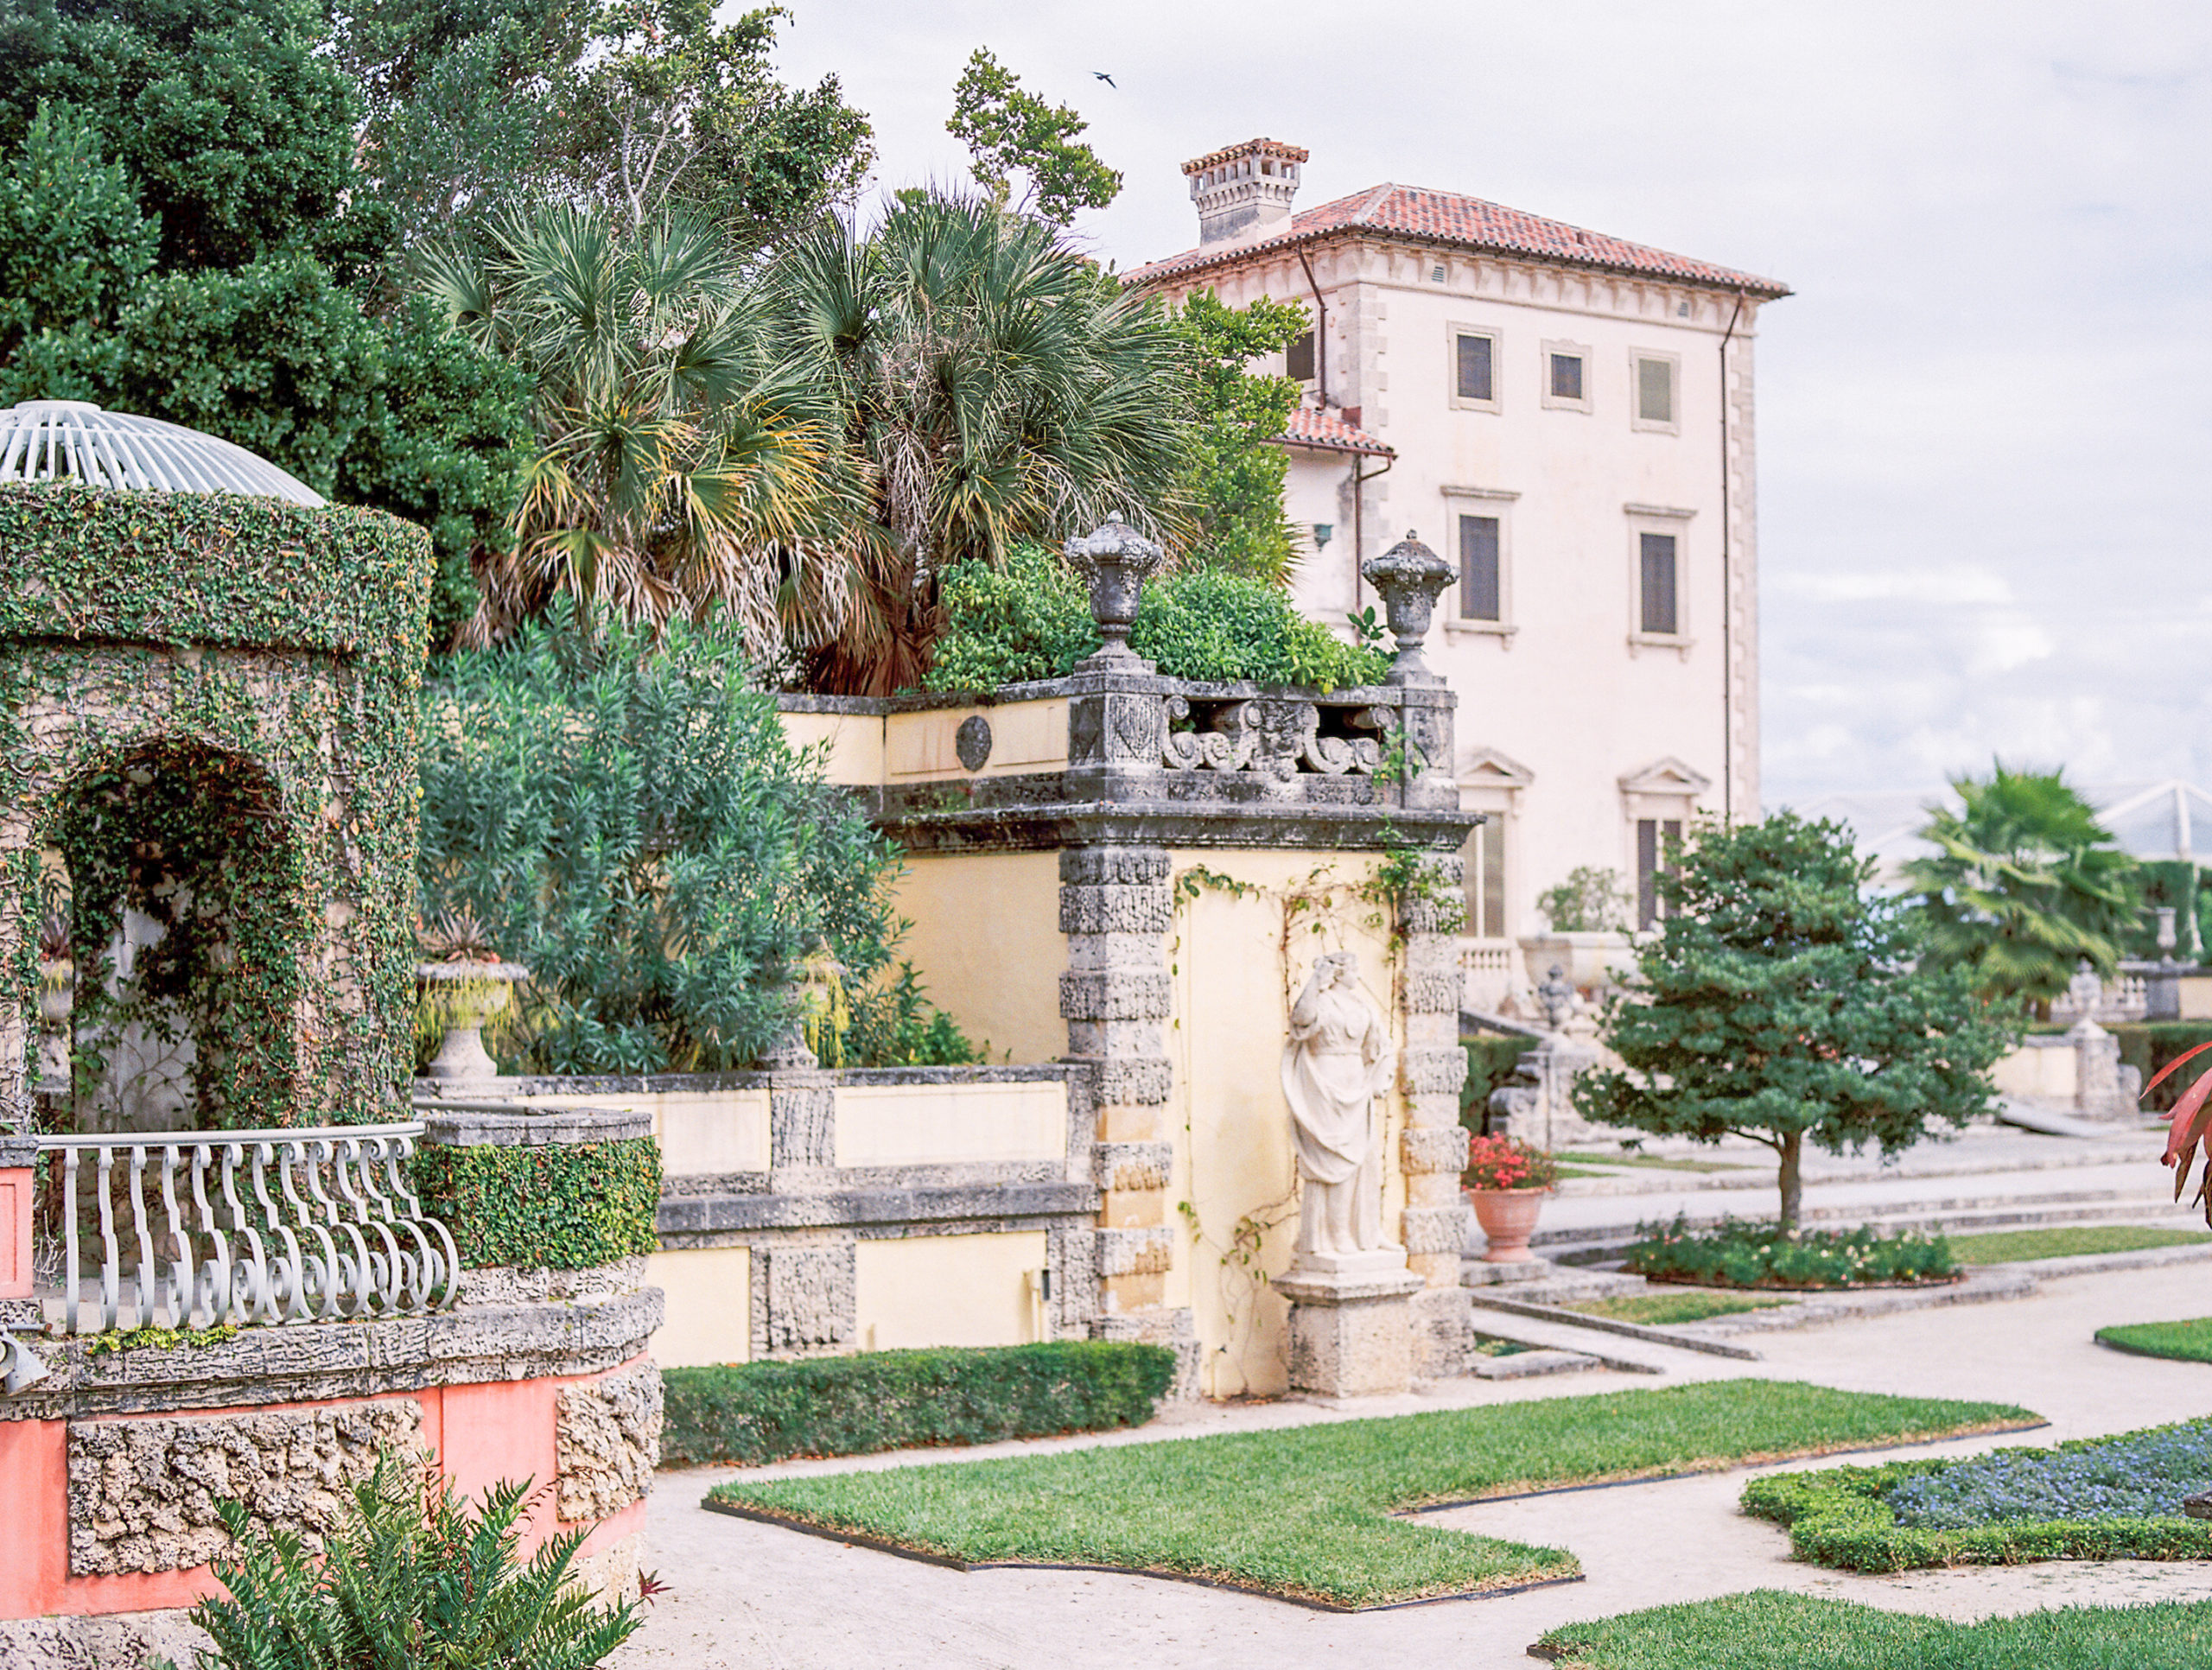 Vizcaya Museum and Gardens on a sunny day